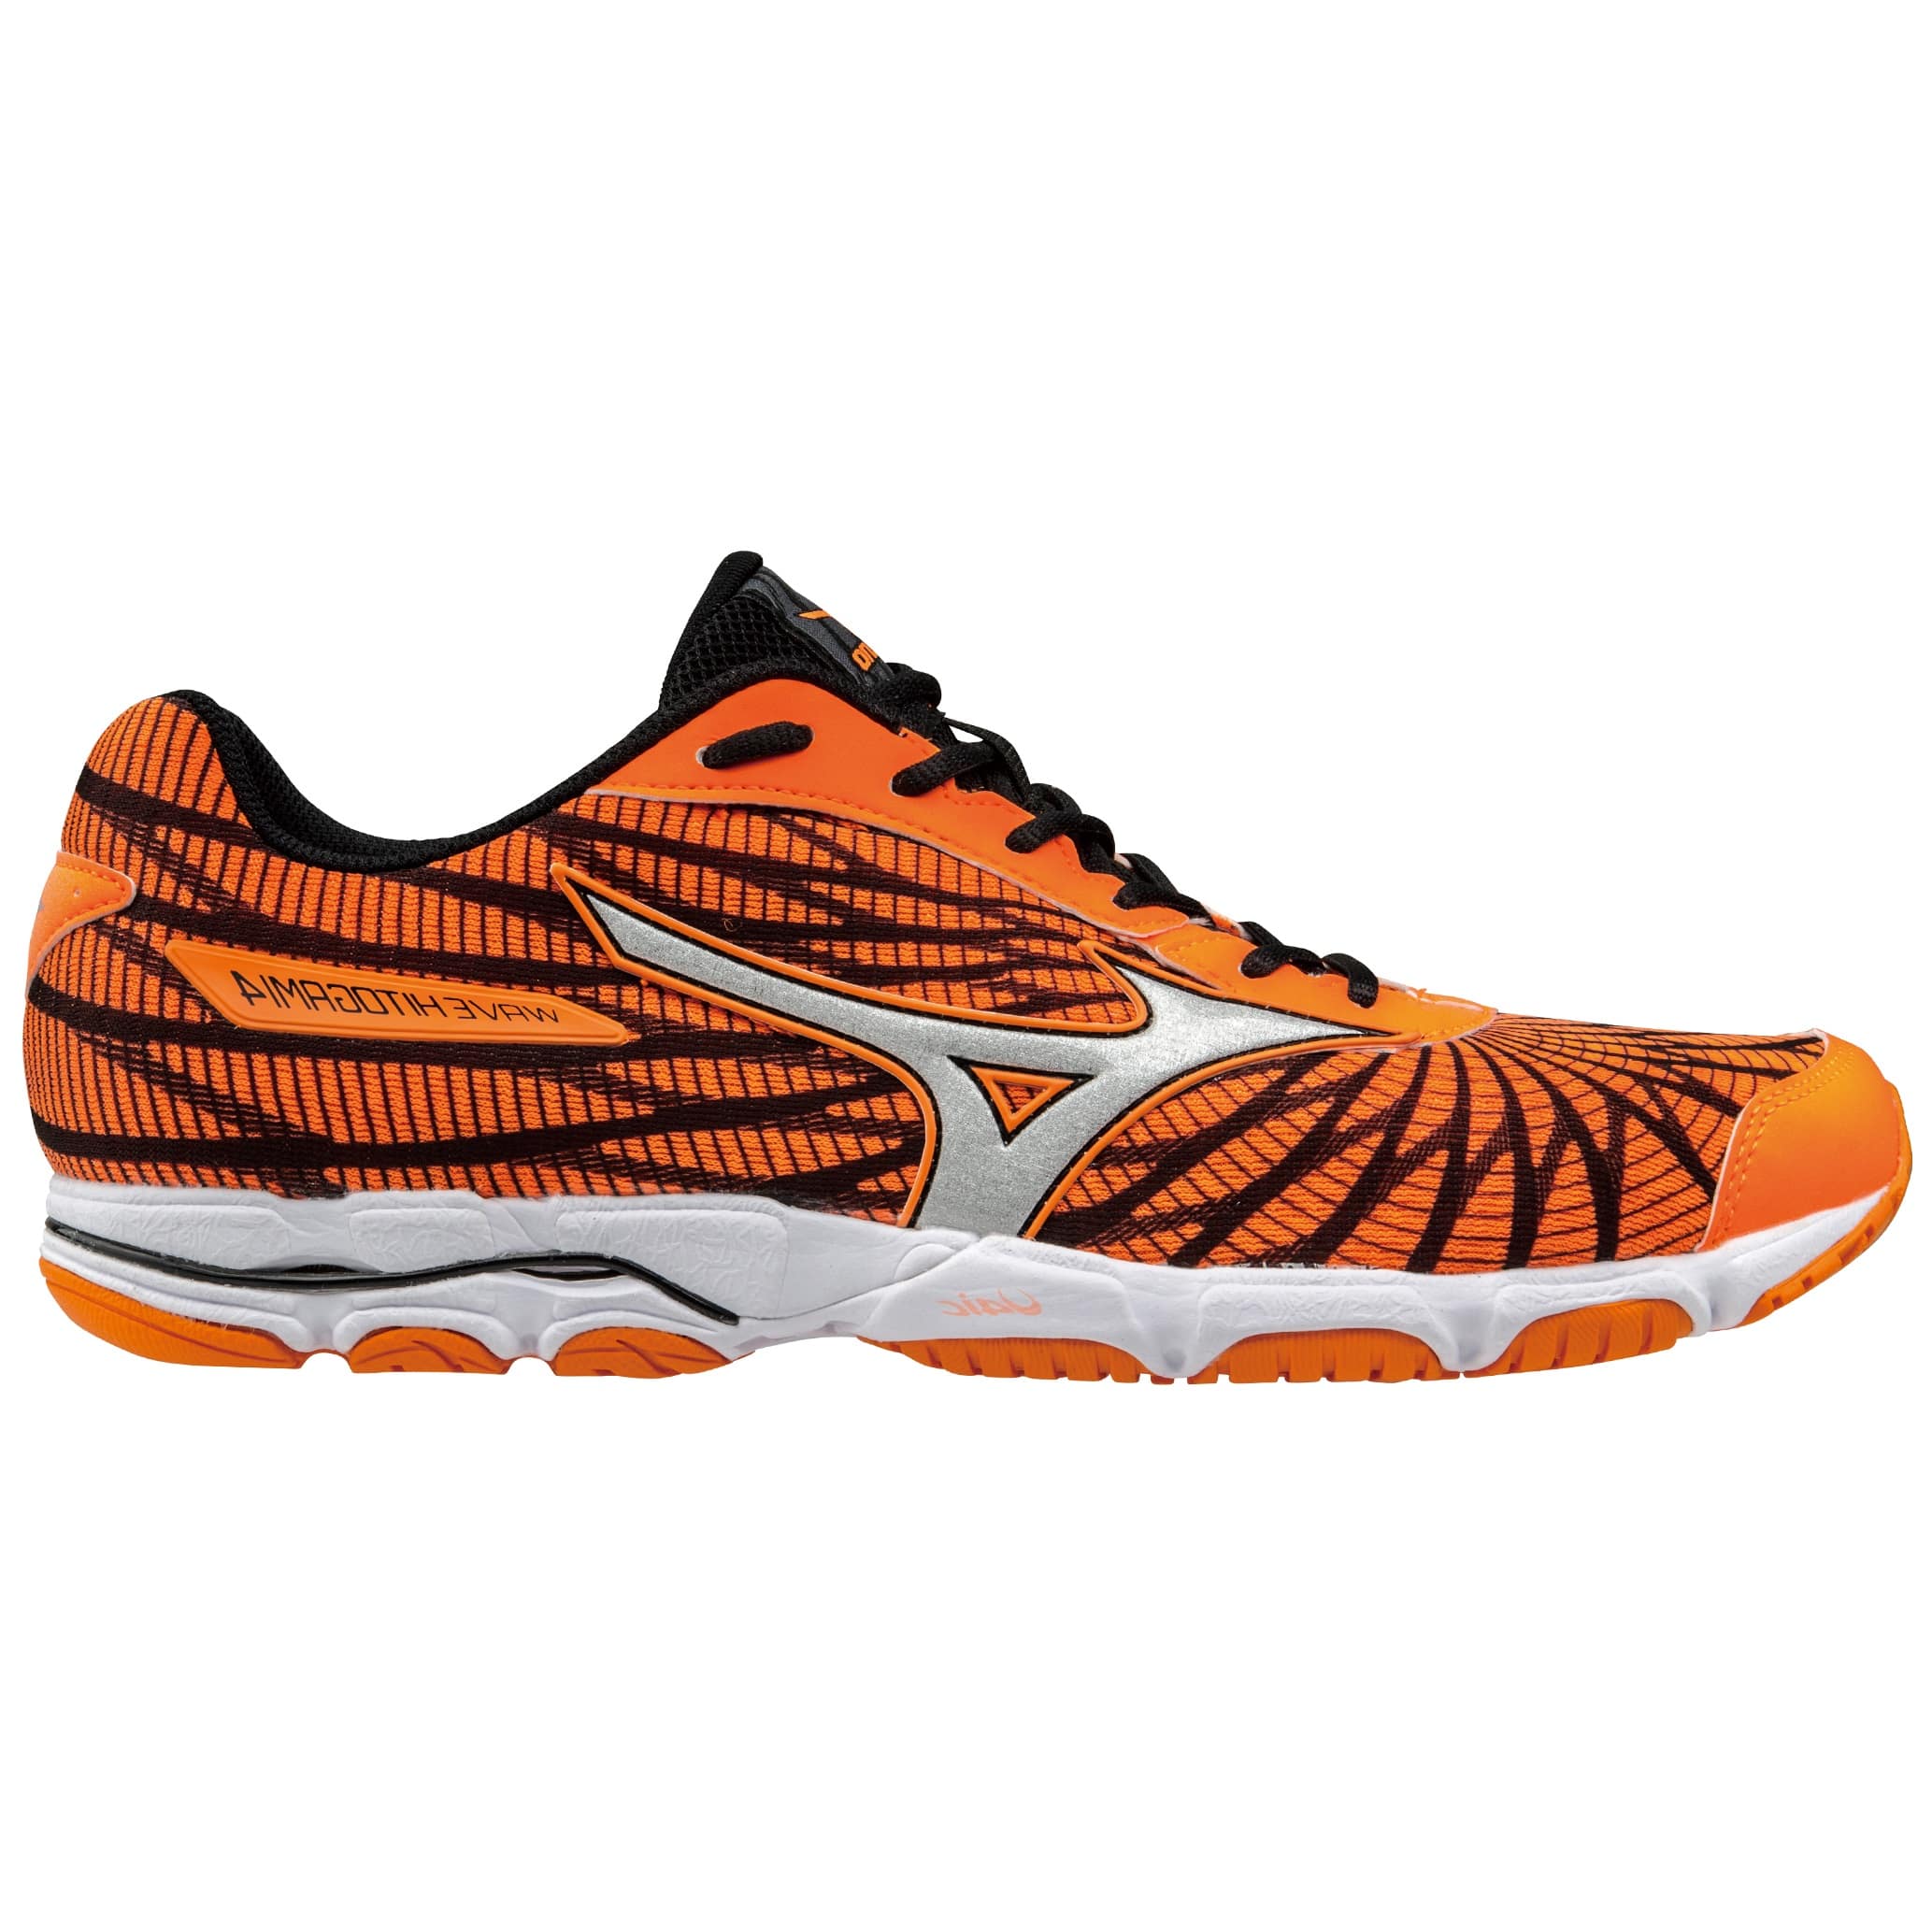 Buy Mizuno Wave Hitogami 4 from Outnorth